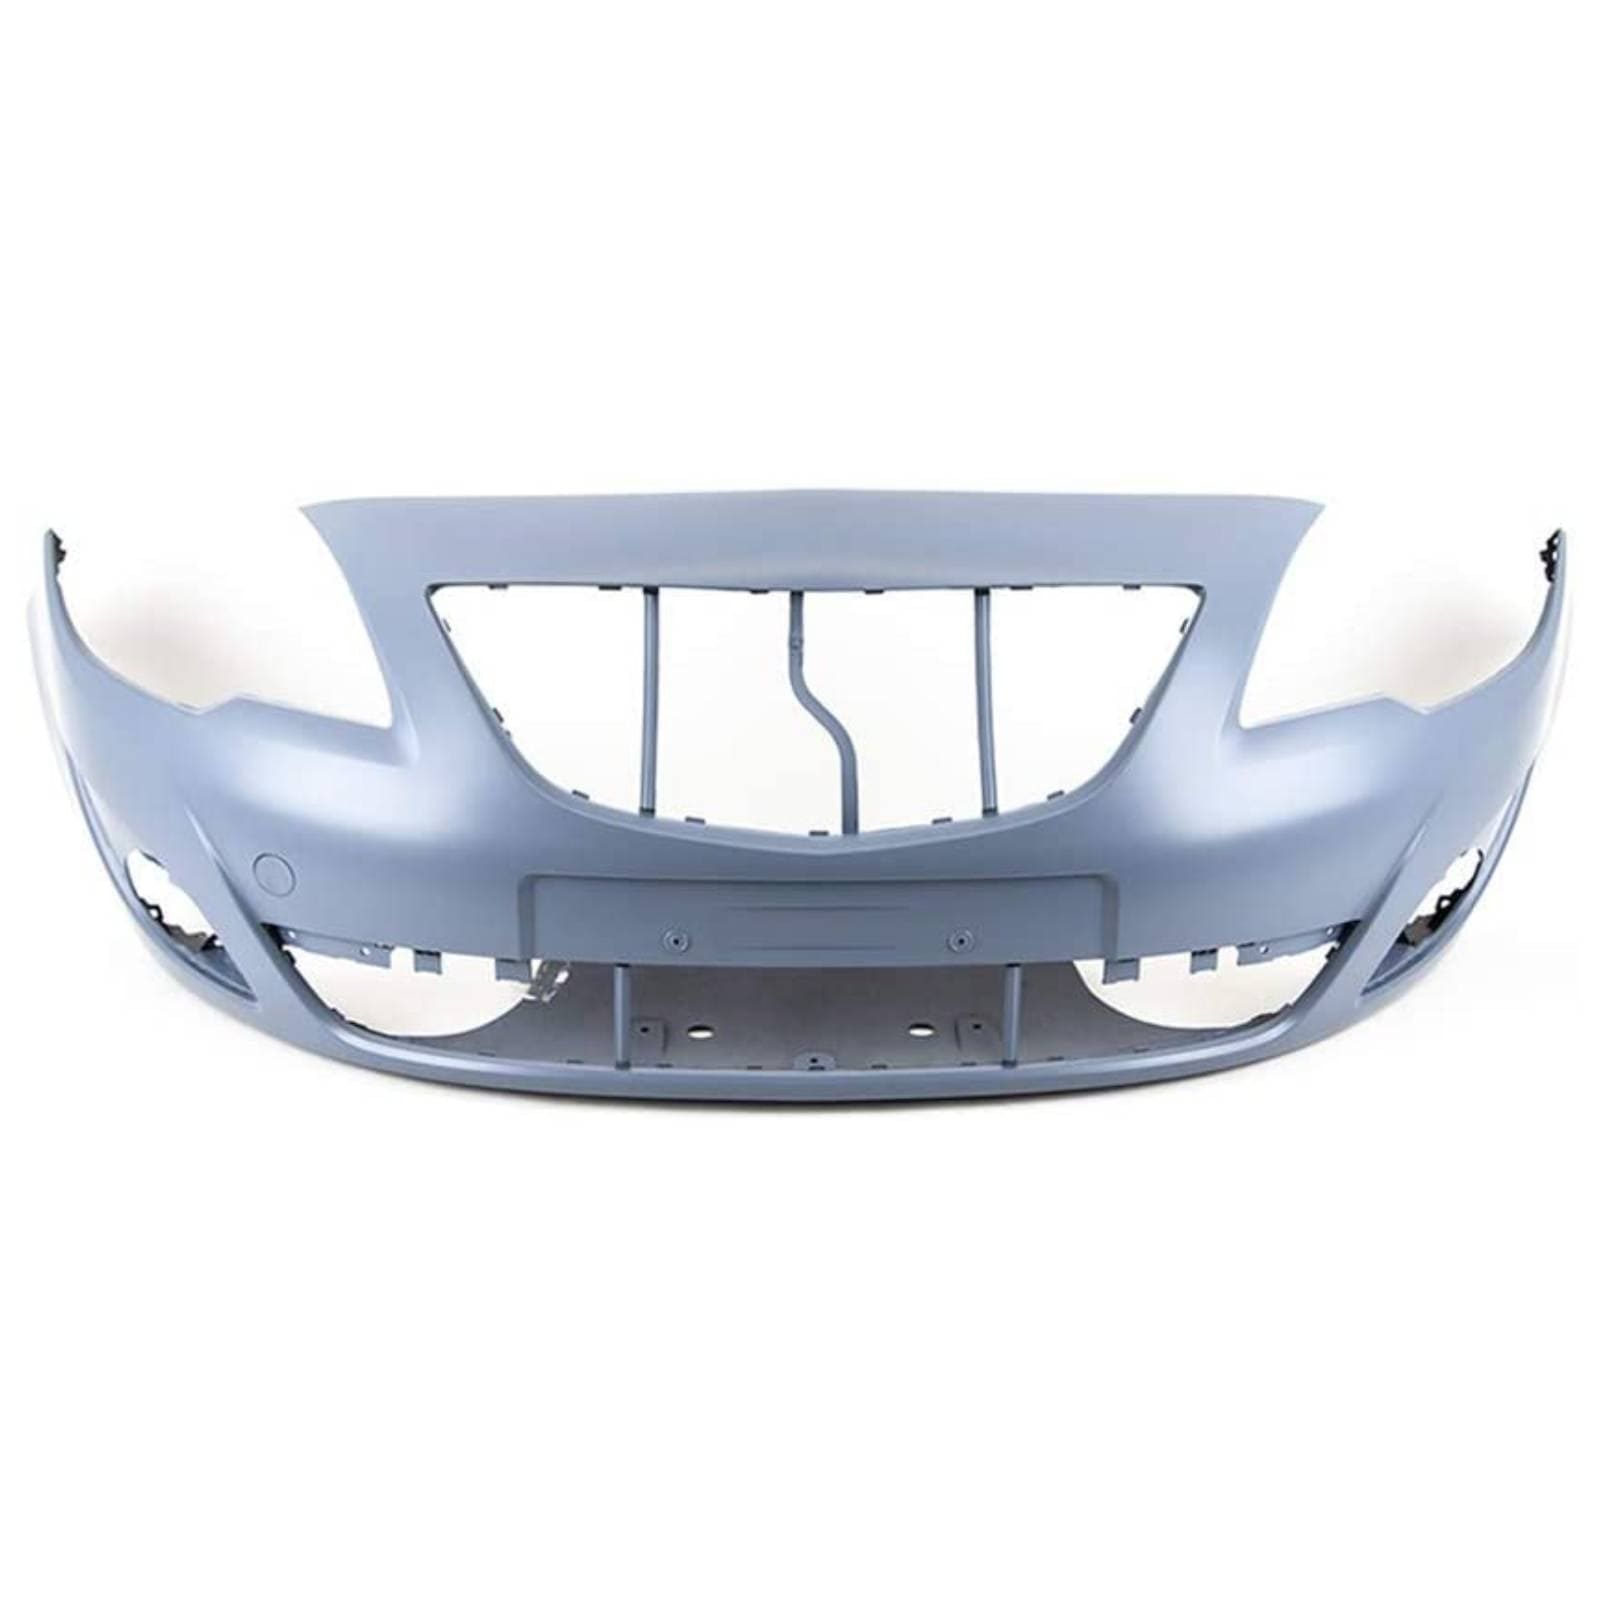 Vauxhall Meriva 2010-2014 Front Bumper Primed No Pdc Or